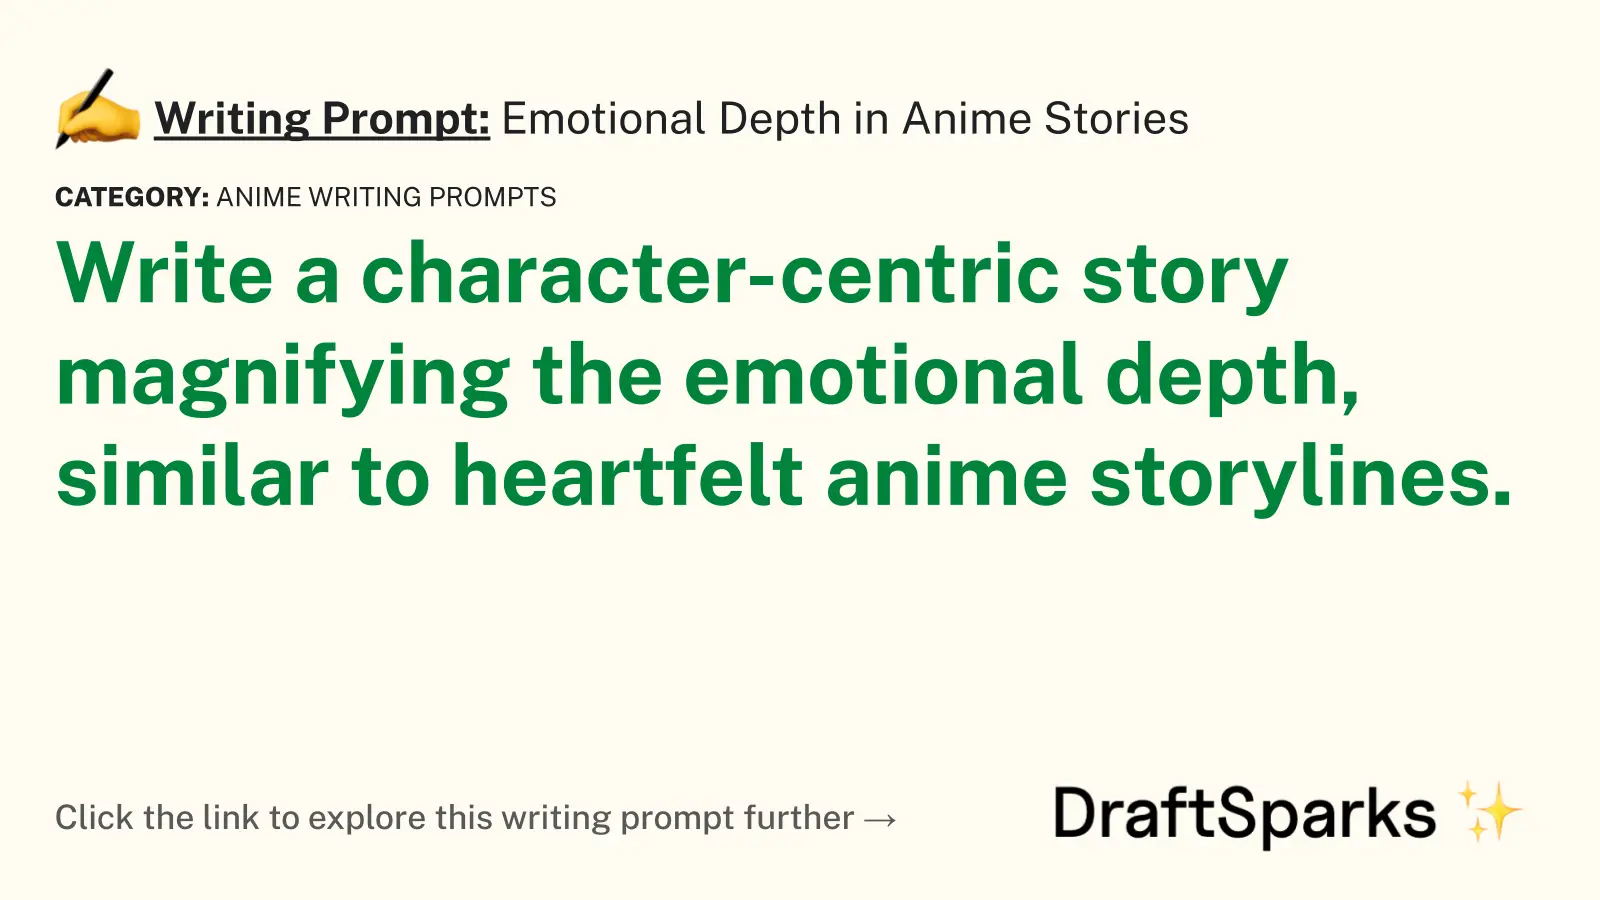 Emotional Depth in Anime Stories